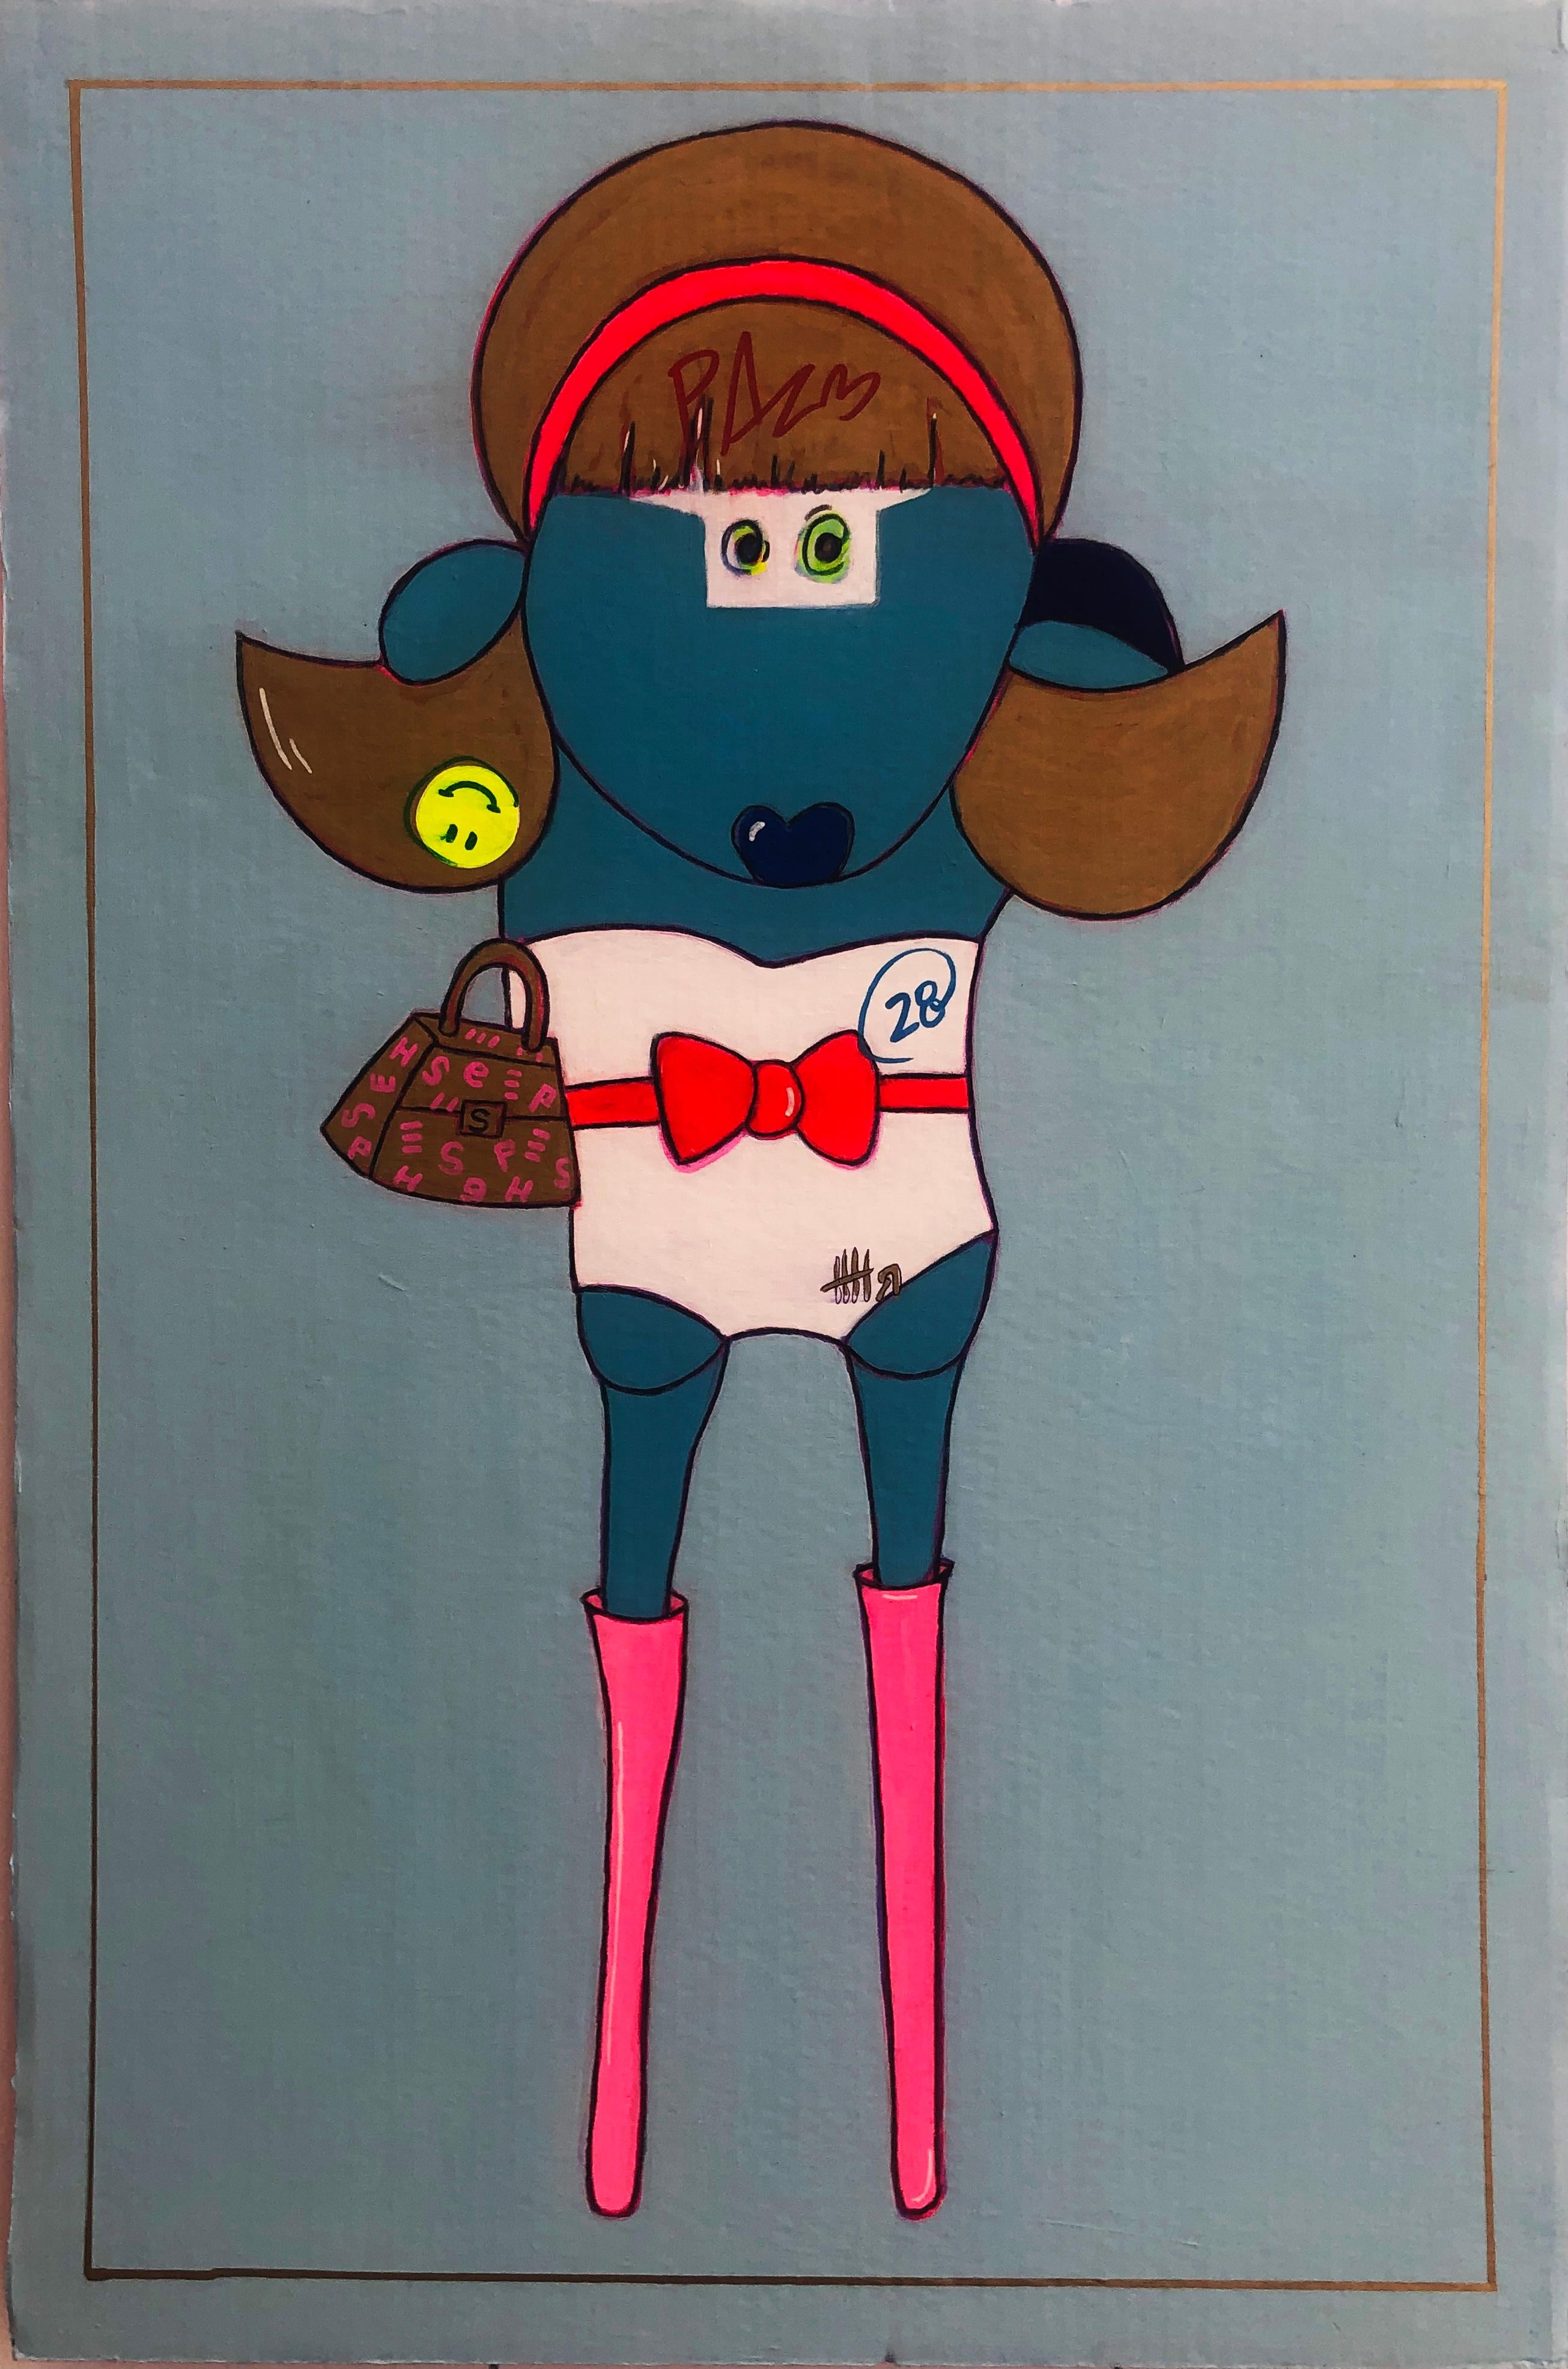 Looking For.. Shirly  - acrylic on cardboard - Painting by Little Ricky